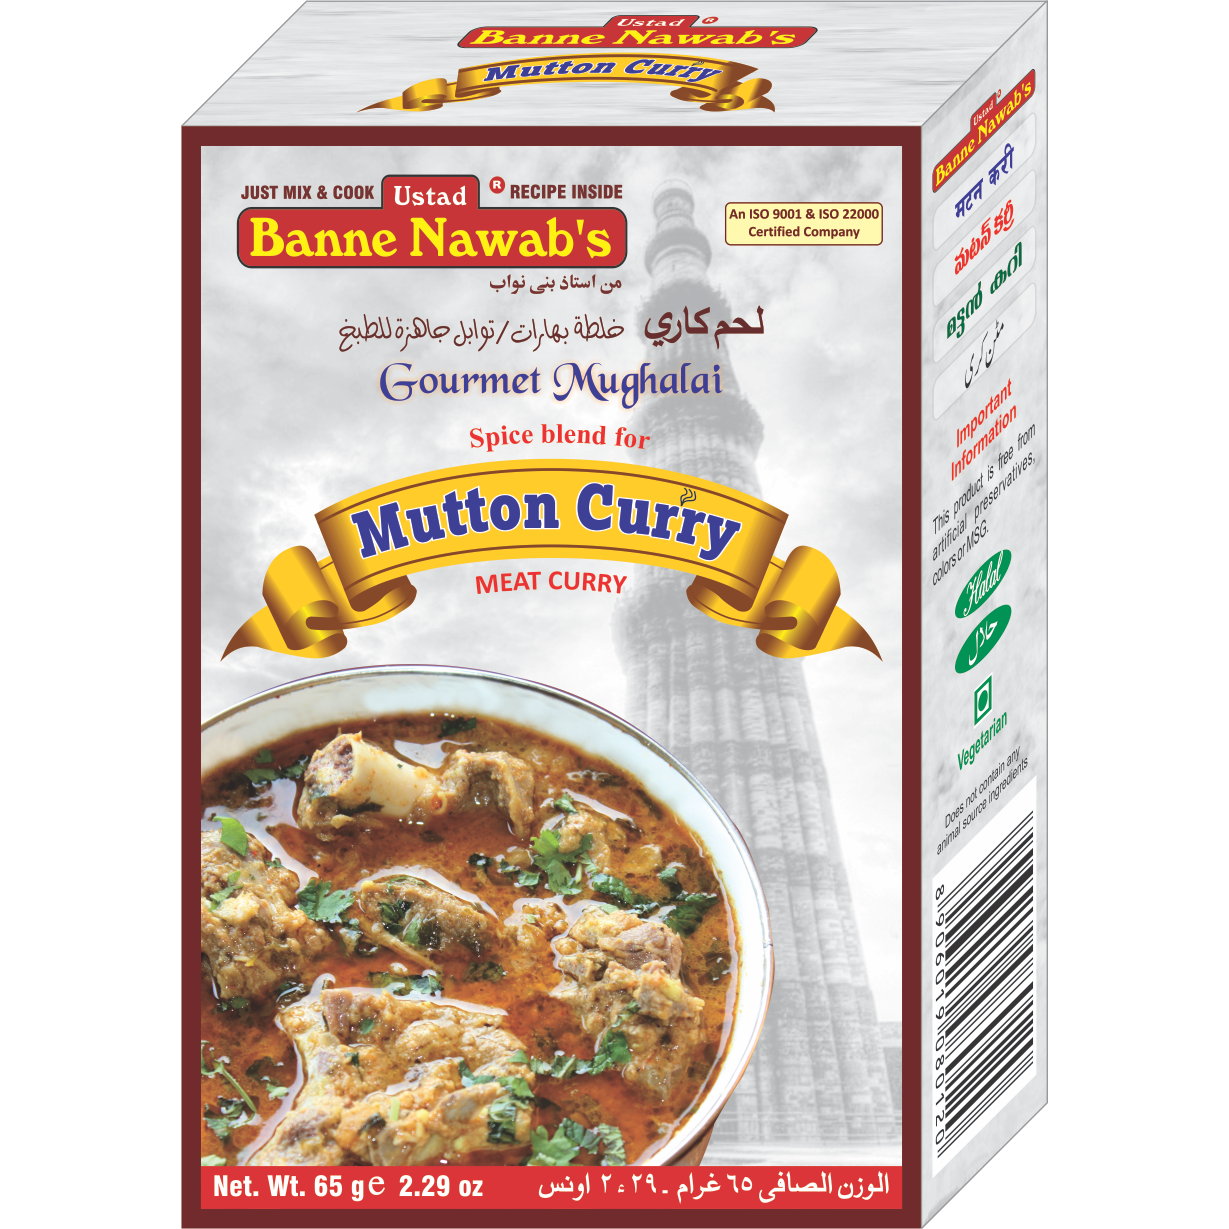 Pack of 4 - Ustad Banne Nawab's Mutton Curry - 65 Gm (2.29 Oz)